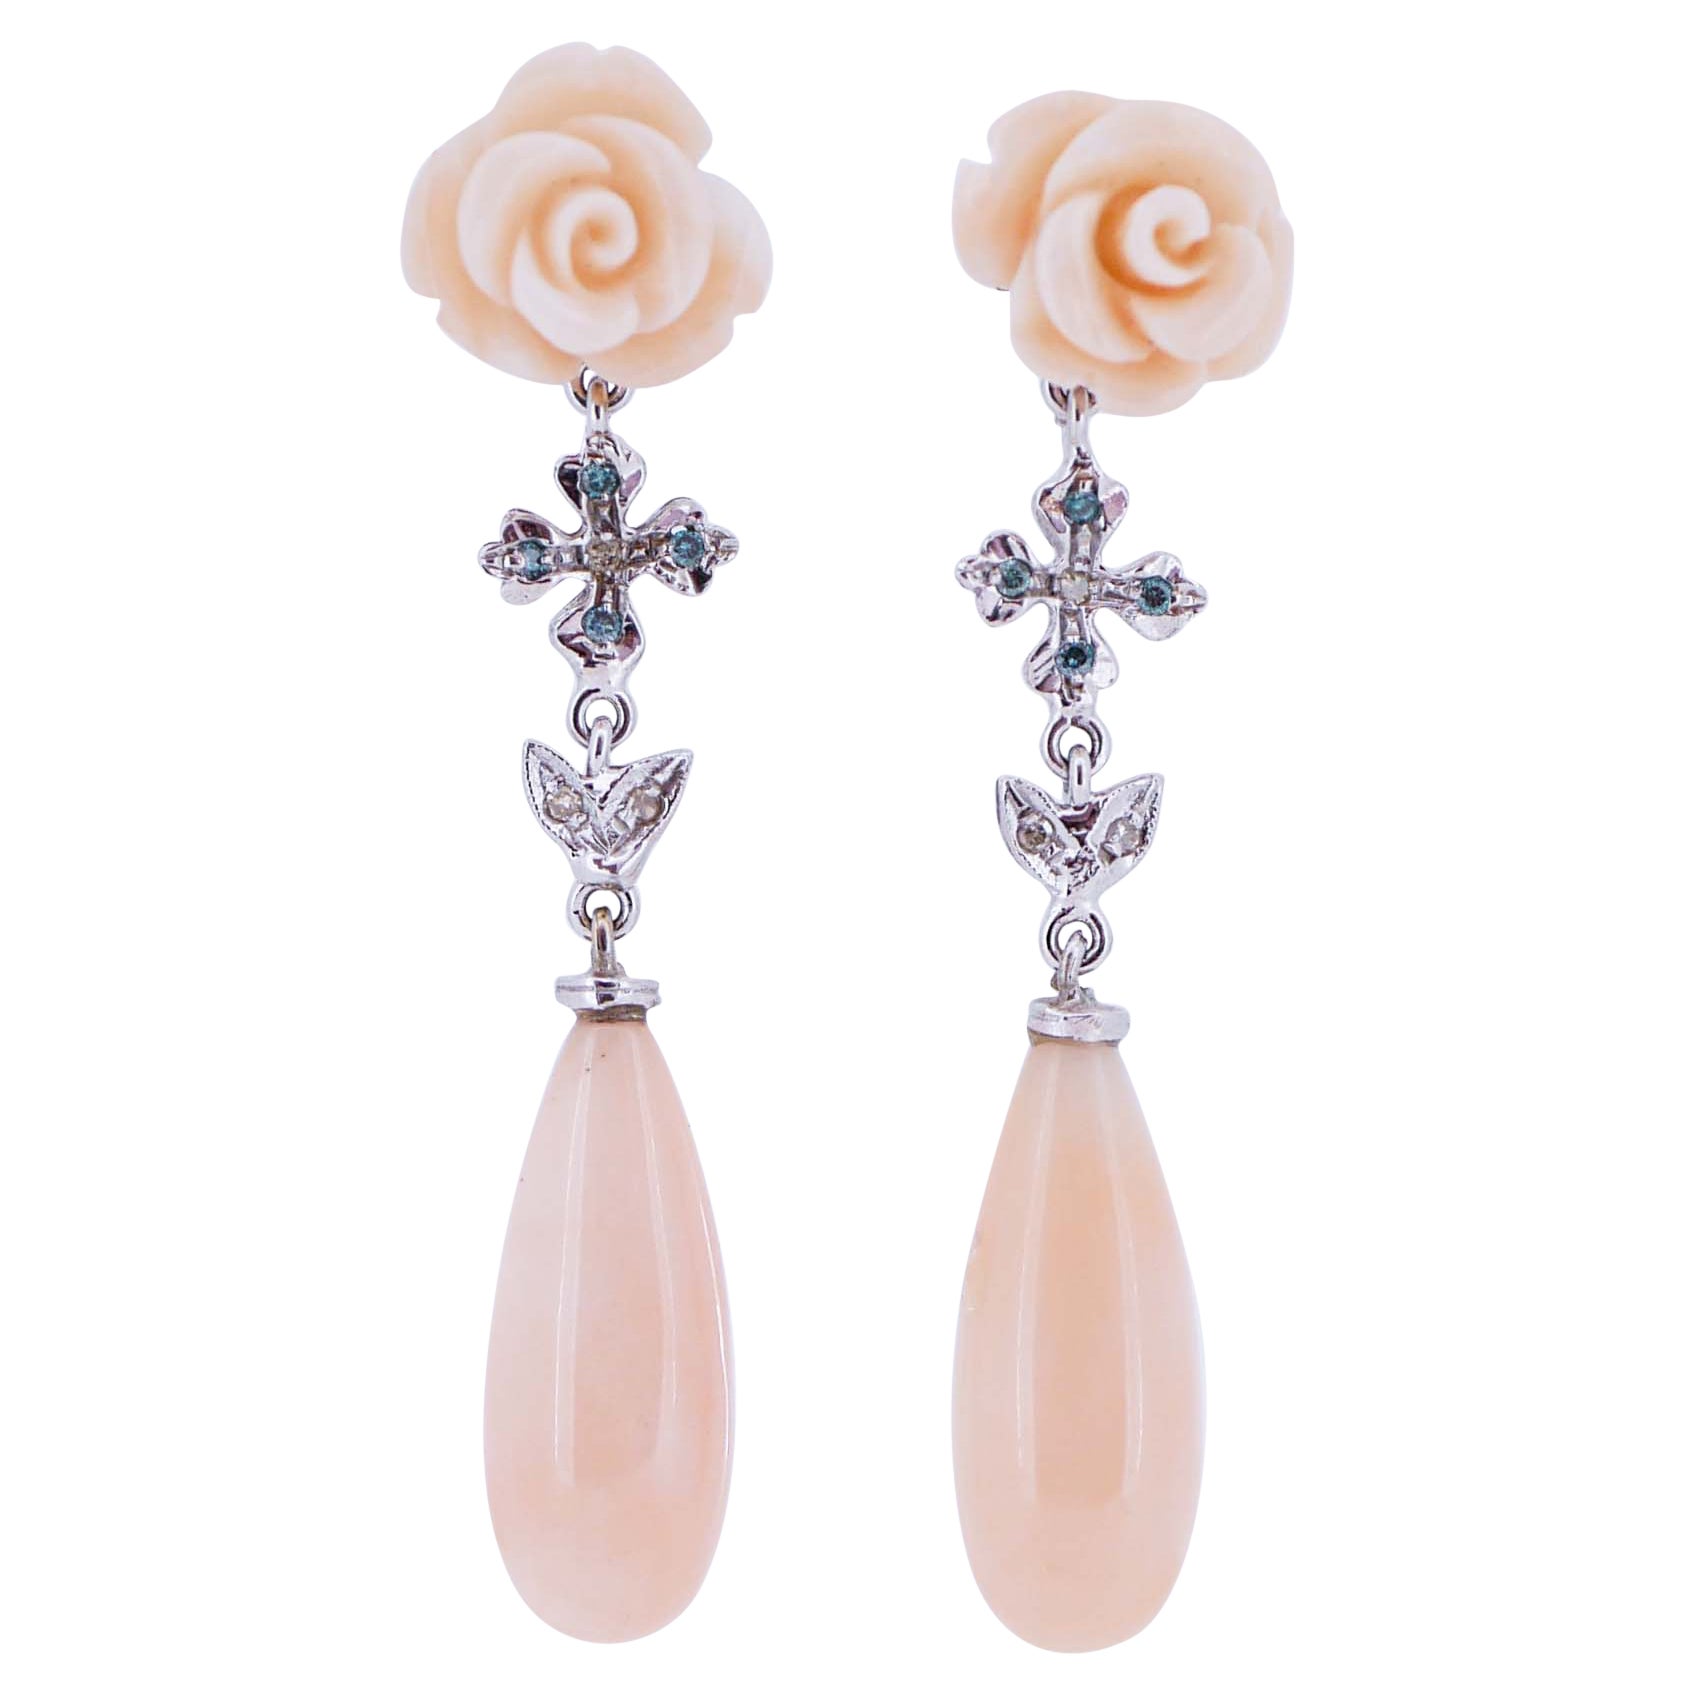 White and Blue Fancy Diamonds, Pink Coral, 14 Karat  White Gold Drop Earrings.